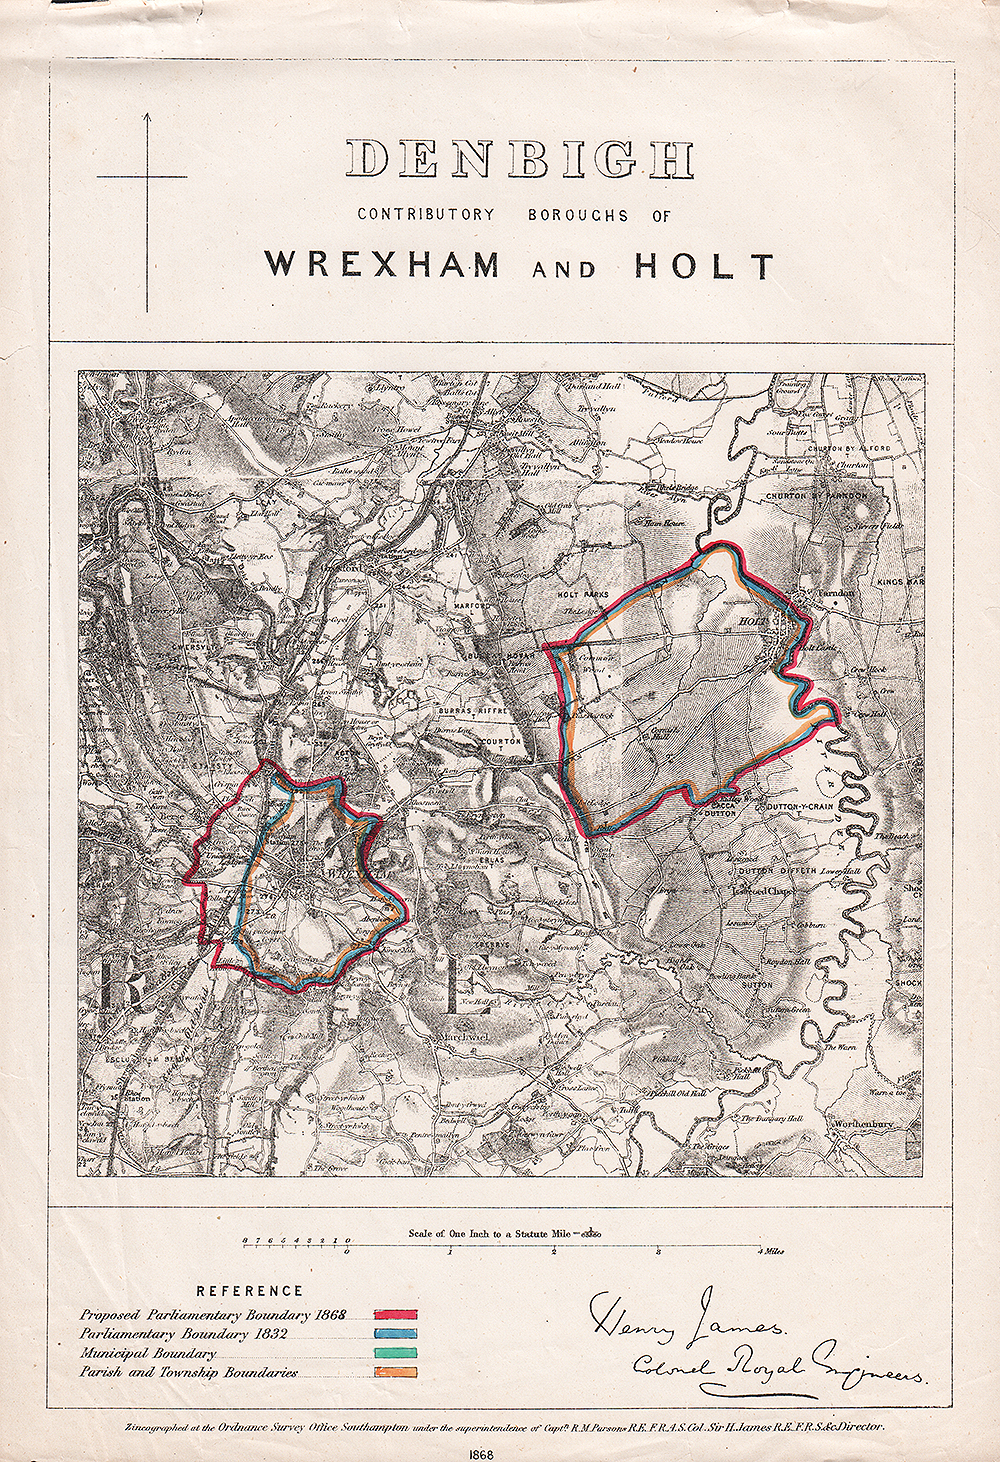 Contributory Boundaries of Wrexham and Holt